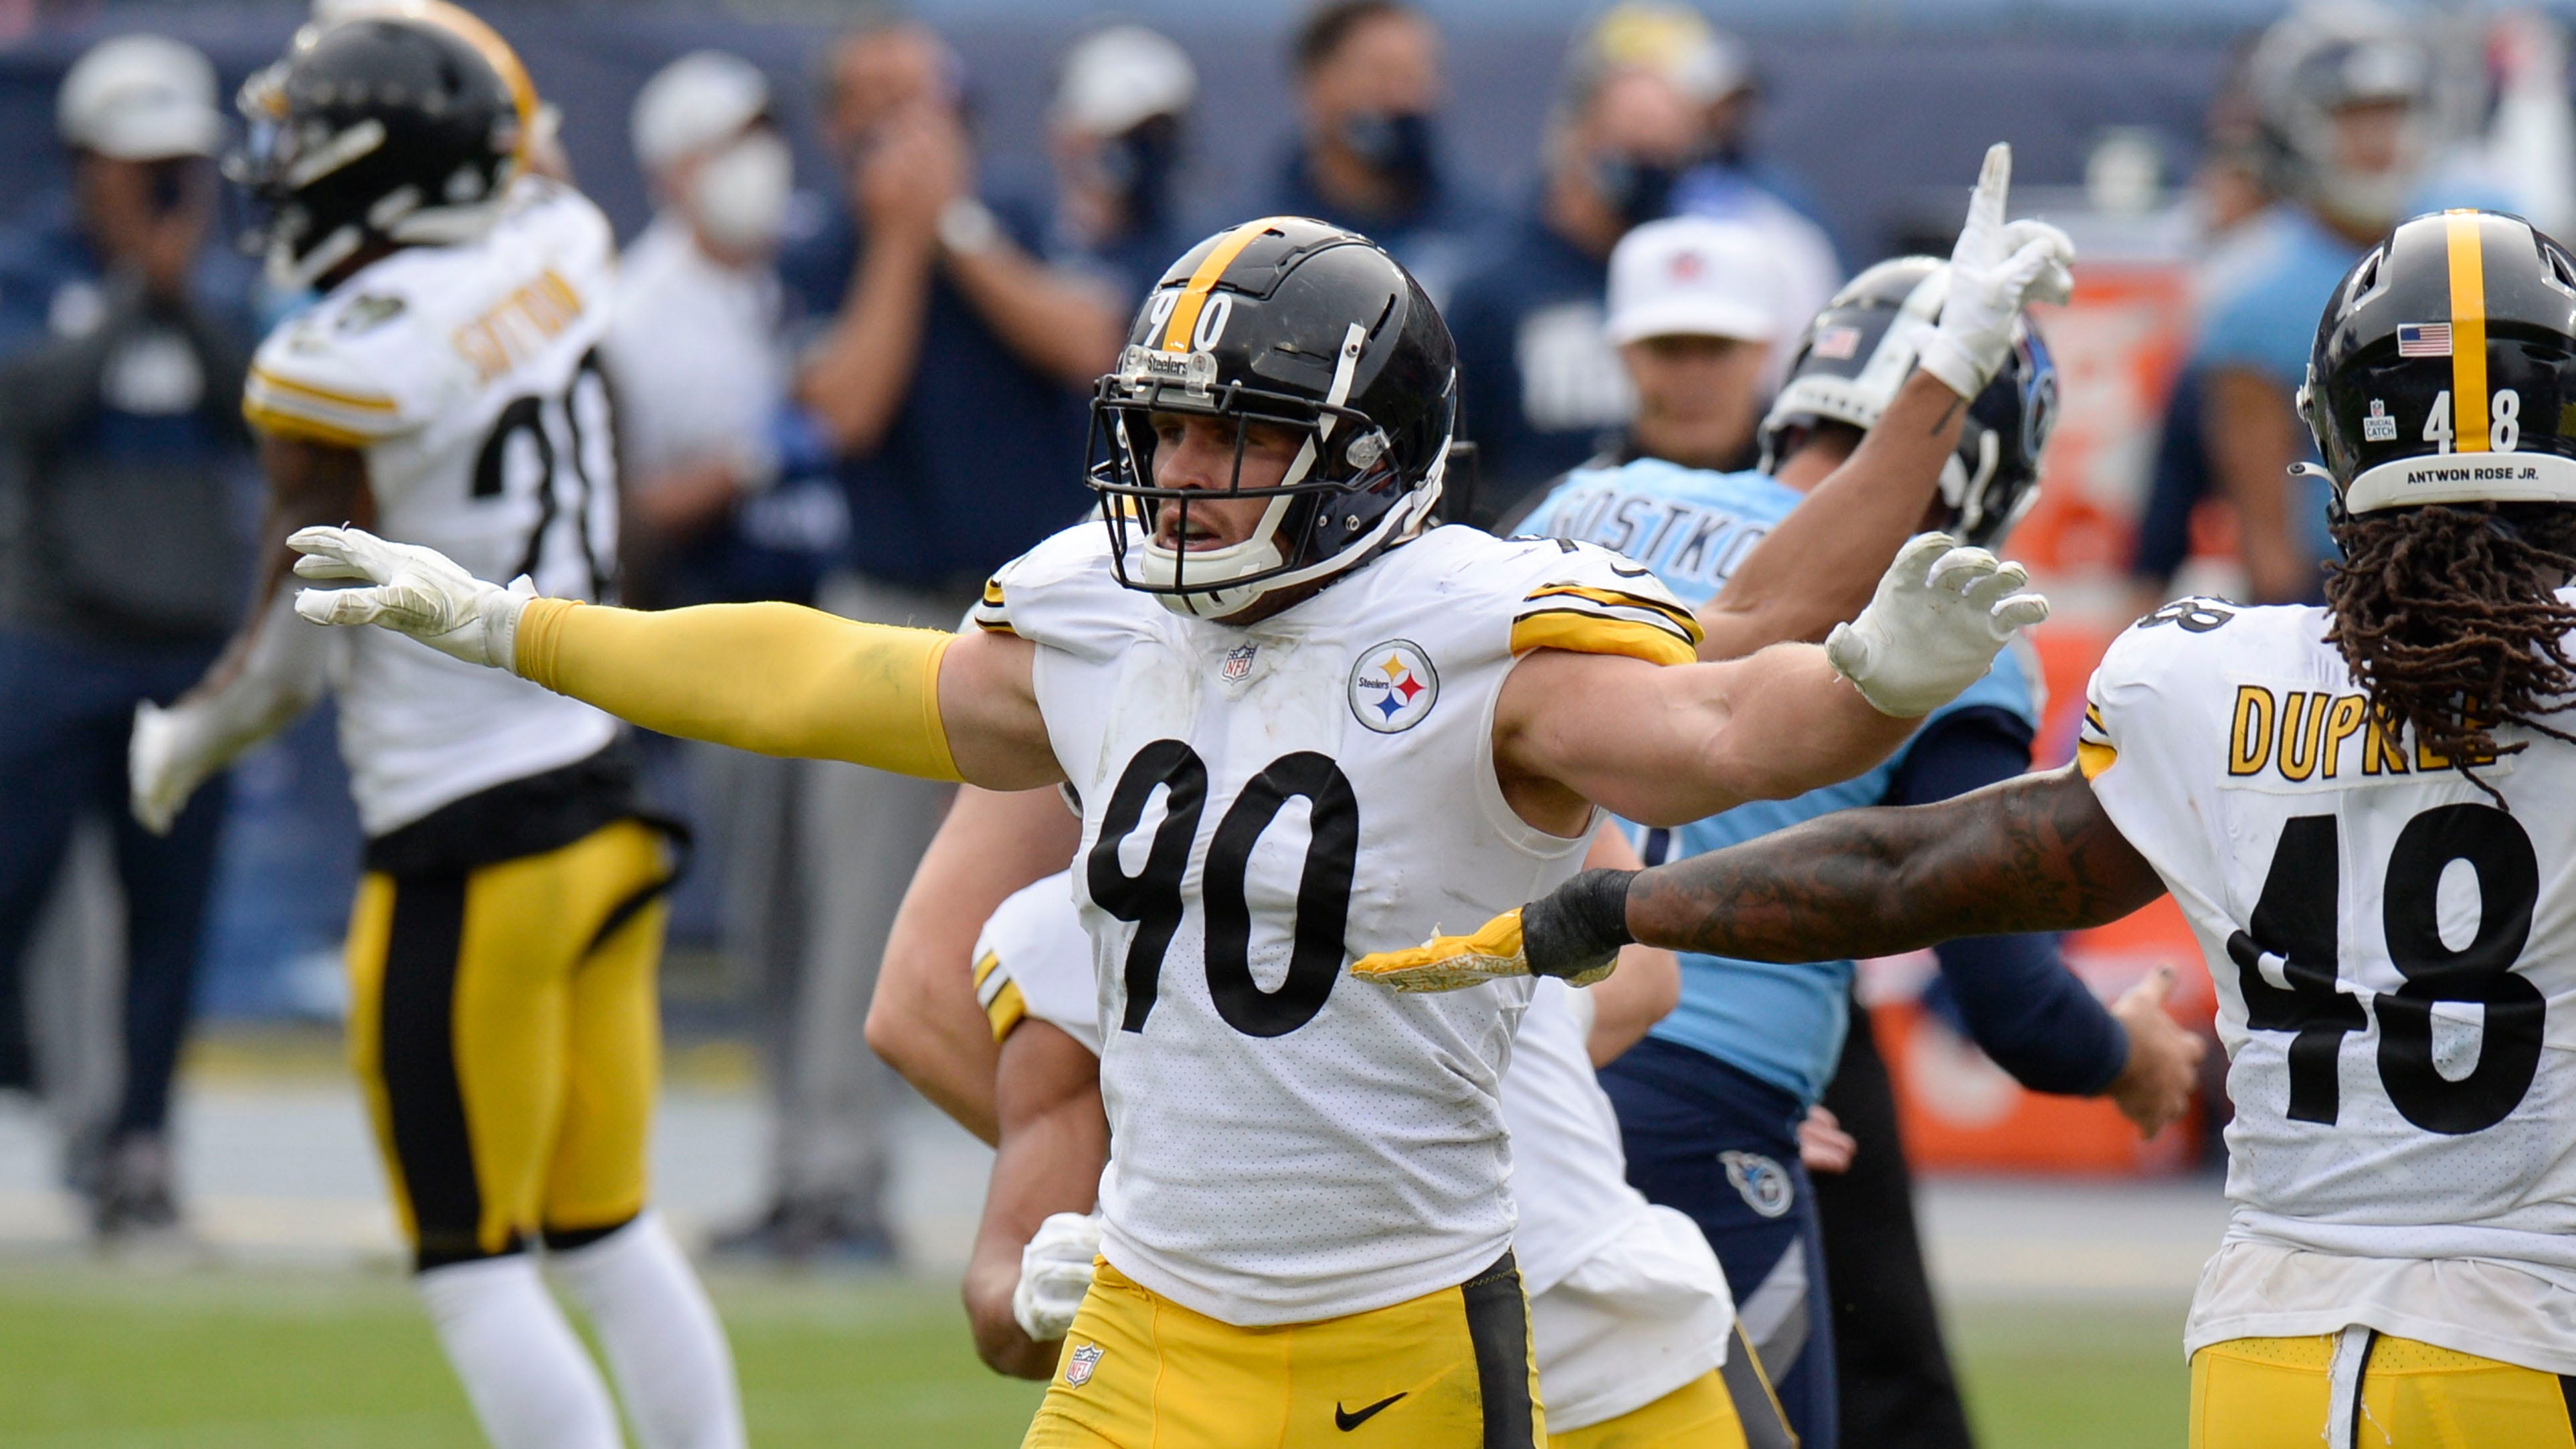 Steelers’ TJ Watt misses AP Defensive Player of the Year, brothers come to his defense